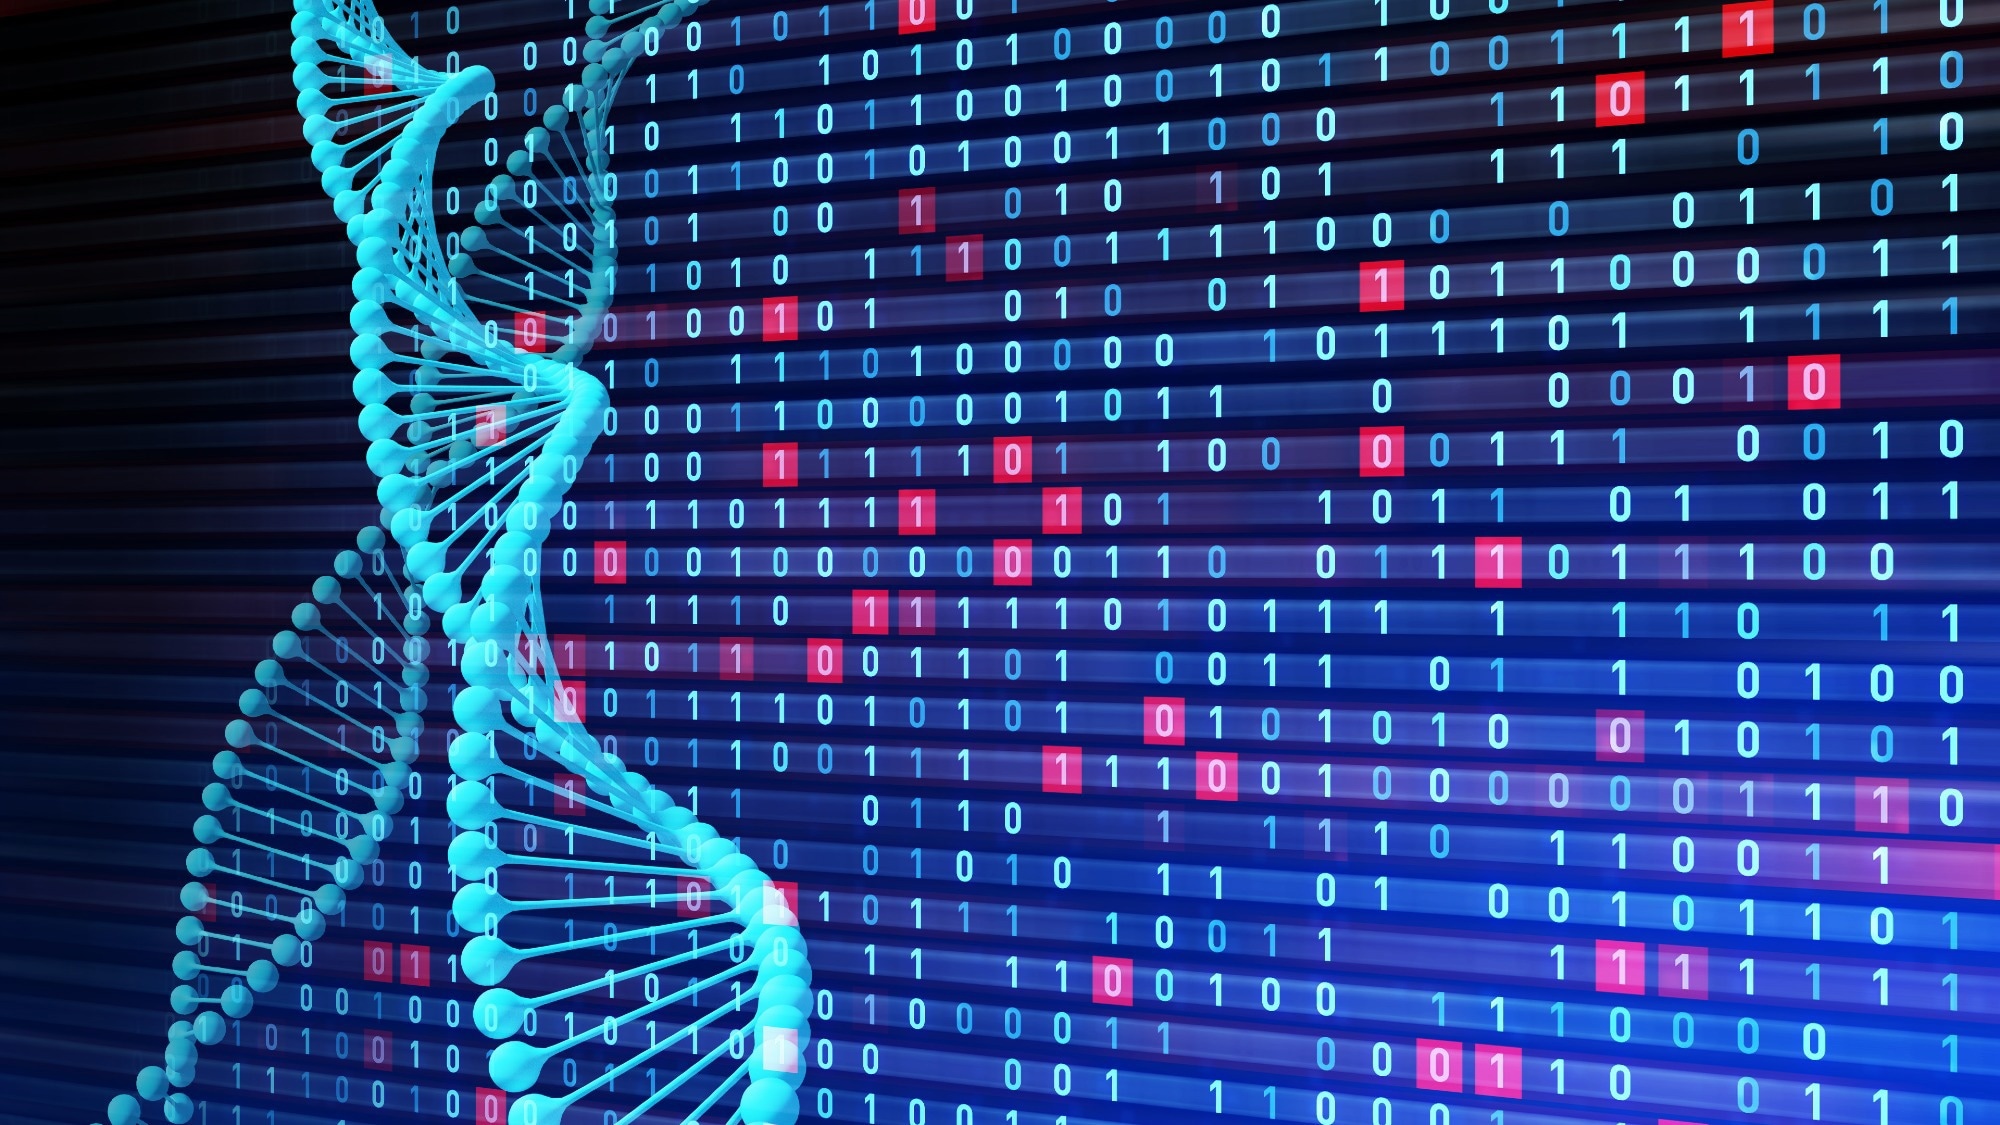 Study: Actionability of unanticipated monogenic disease risks in newborn genomic screening: Findings from the BabySeq Project. Image Credit: metamorworks / Shutterstock